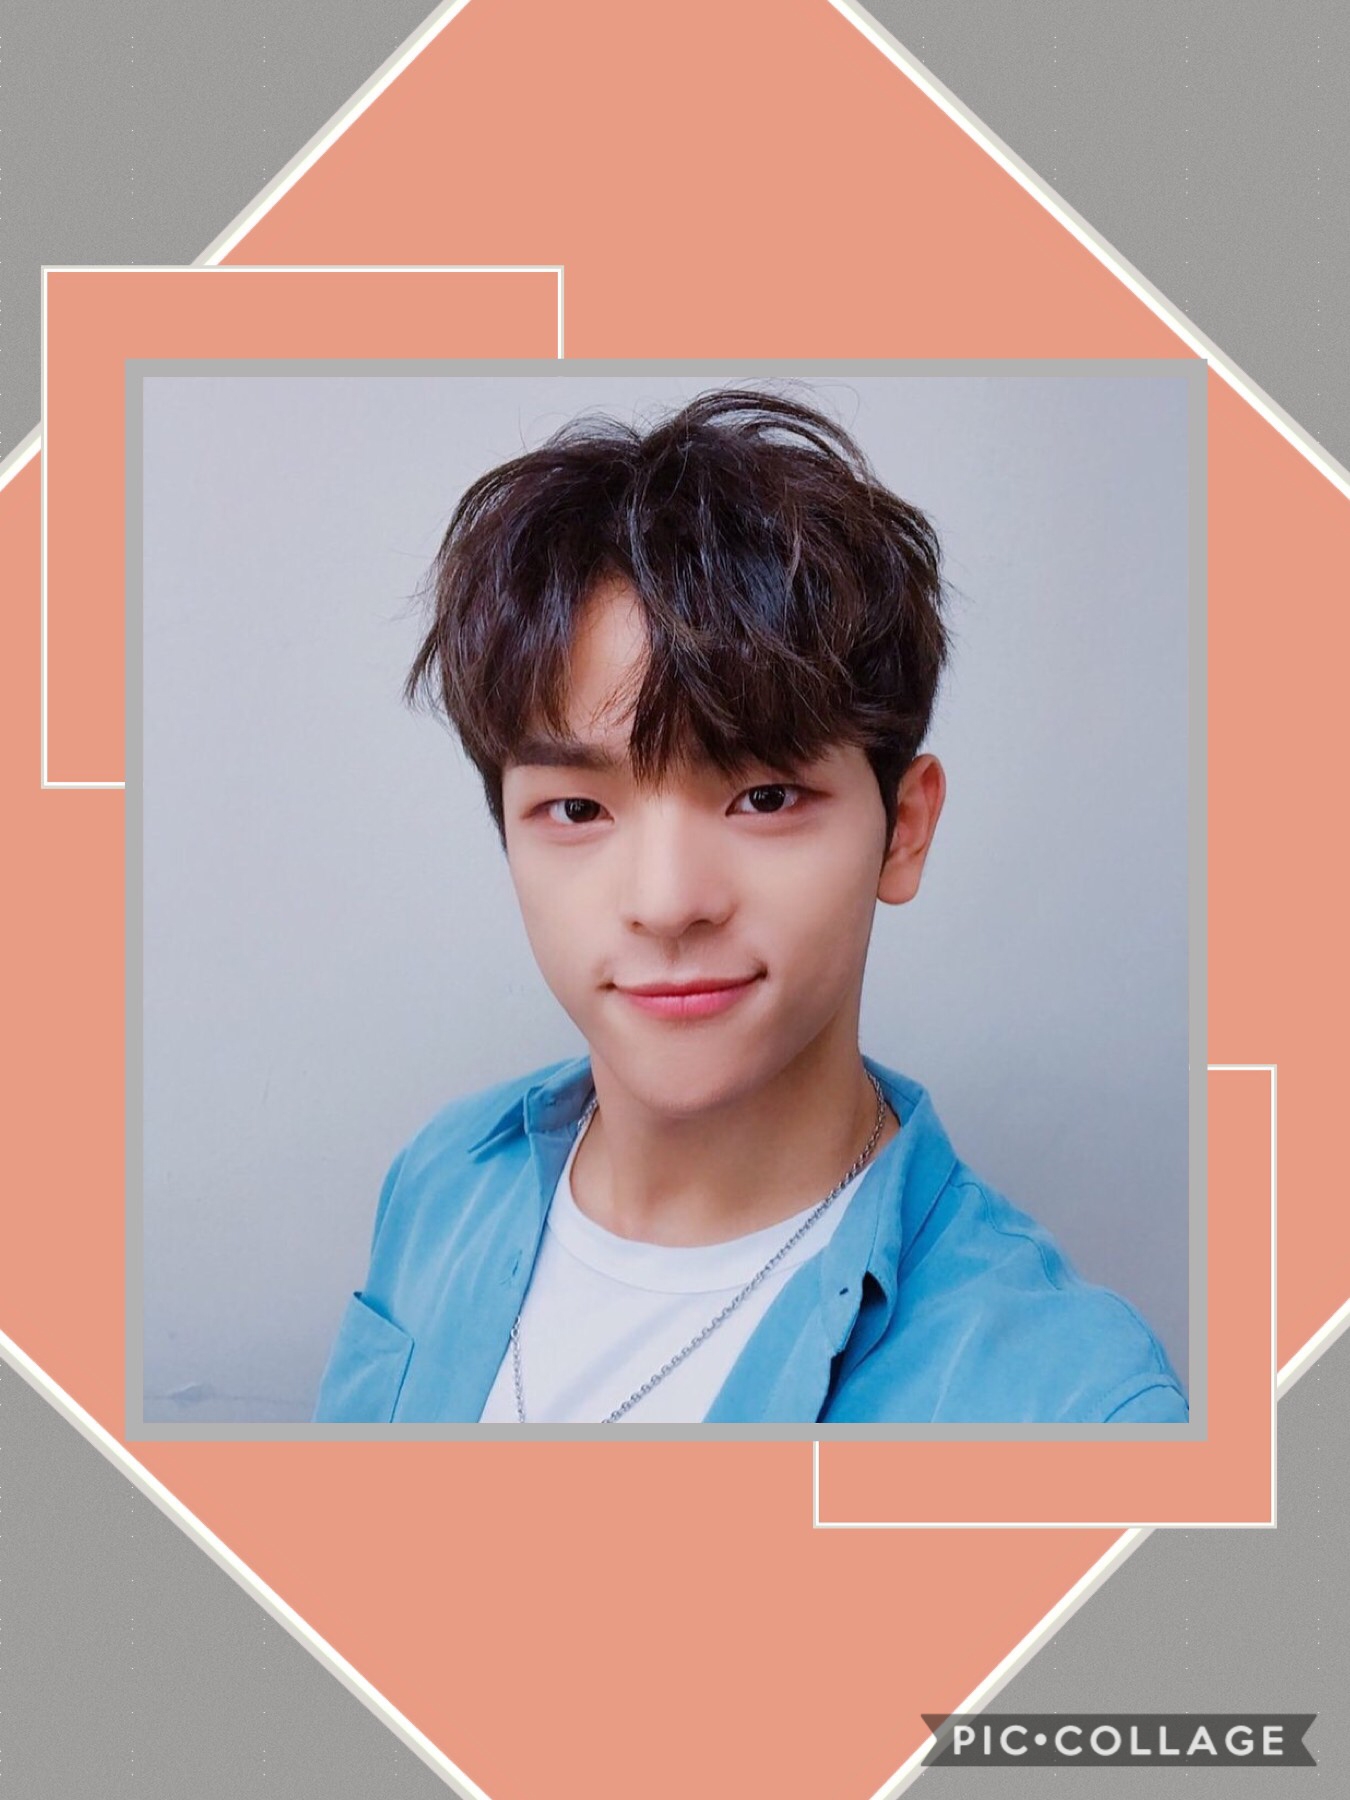 My lovely mangos...

I am SO sorry for not posting edits. 

But here’s one! The one and only... Kim Woojin!

Hope you like it! It’s very simple haha